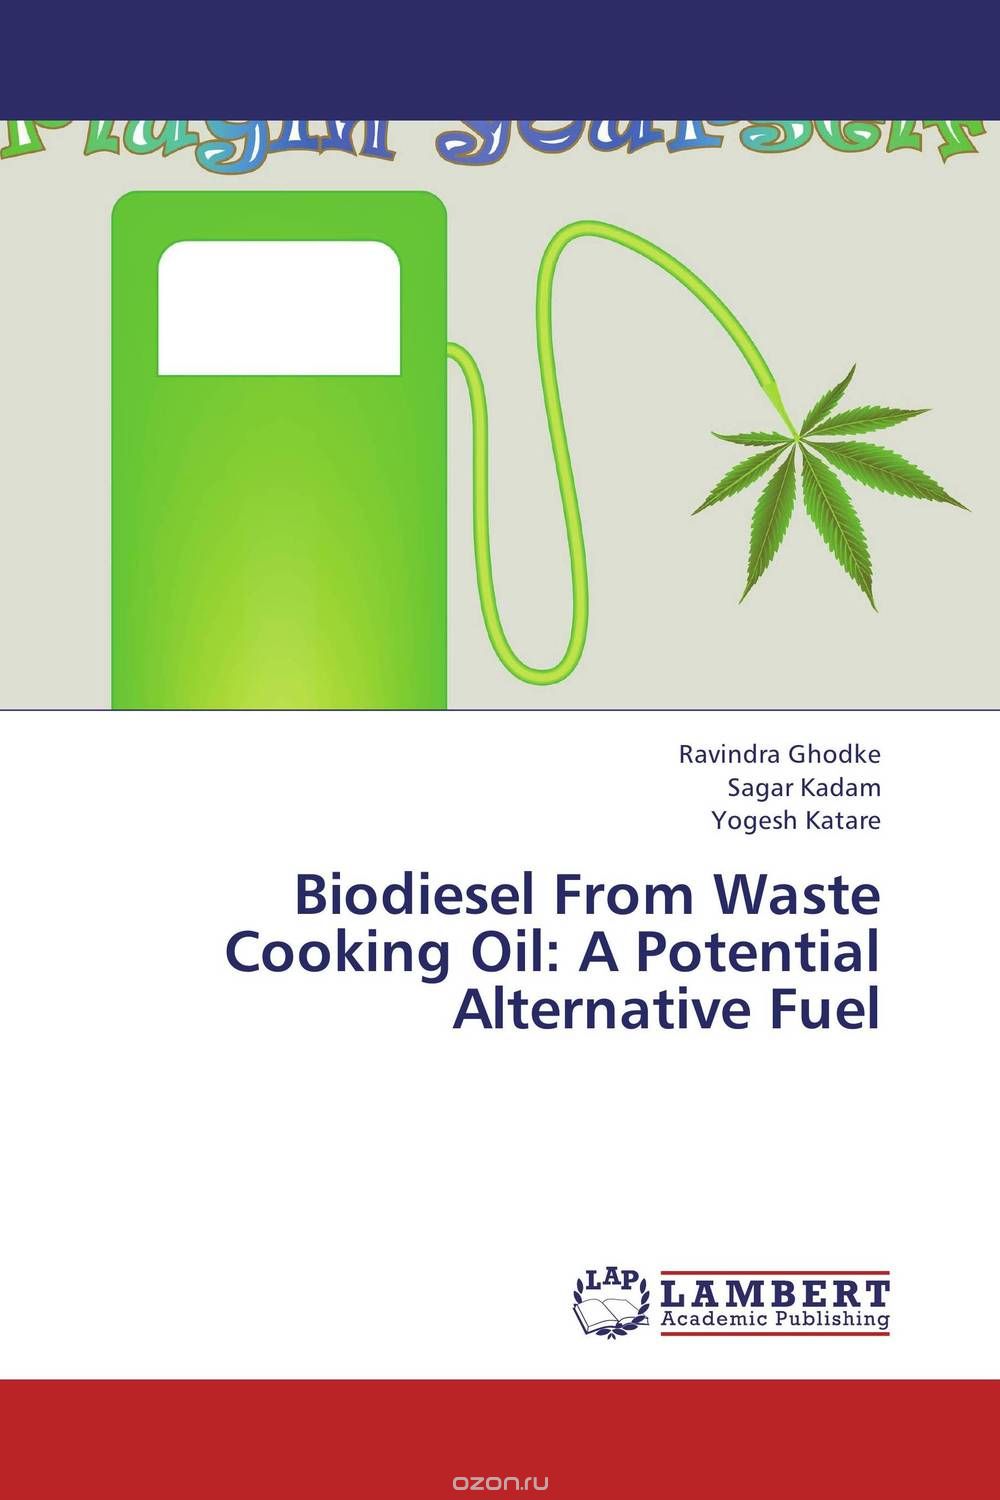 Скачать книгу "Biodiesel From Waste Cooking Oil: A Potential Alternative Fuel"